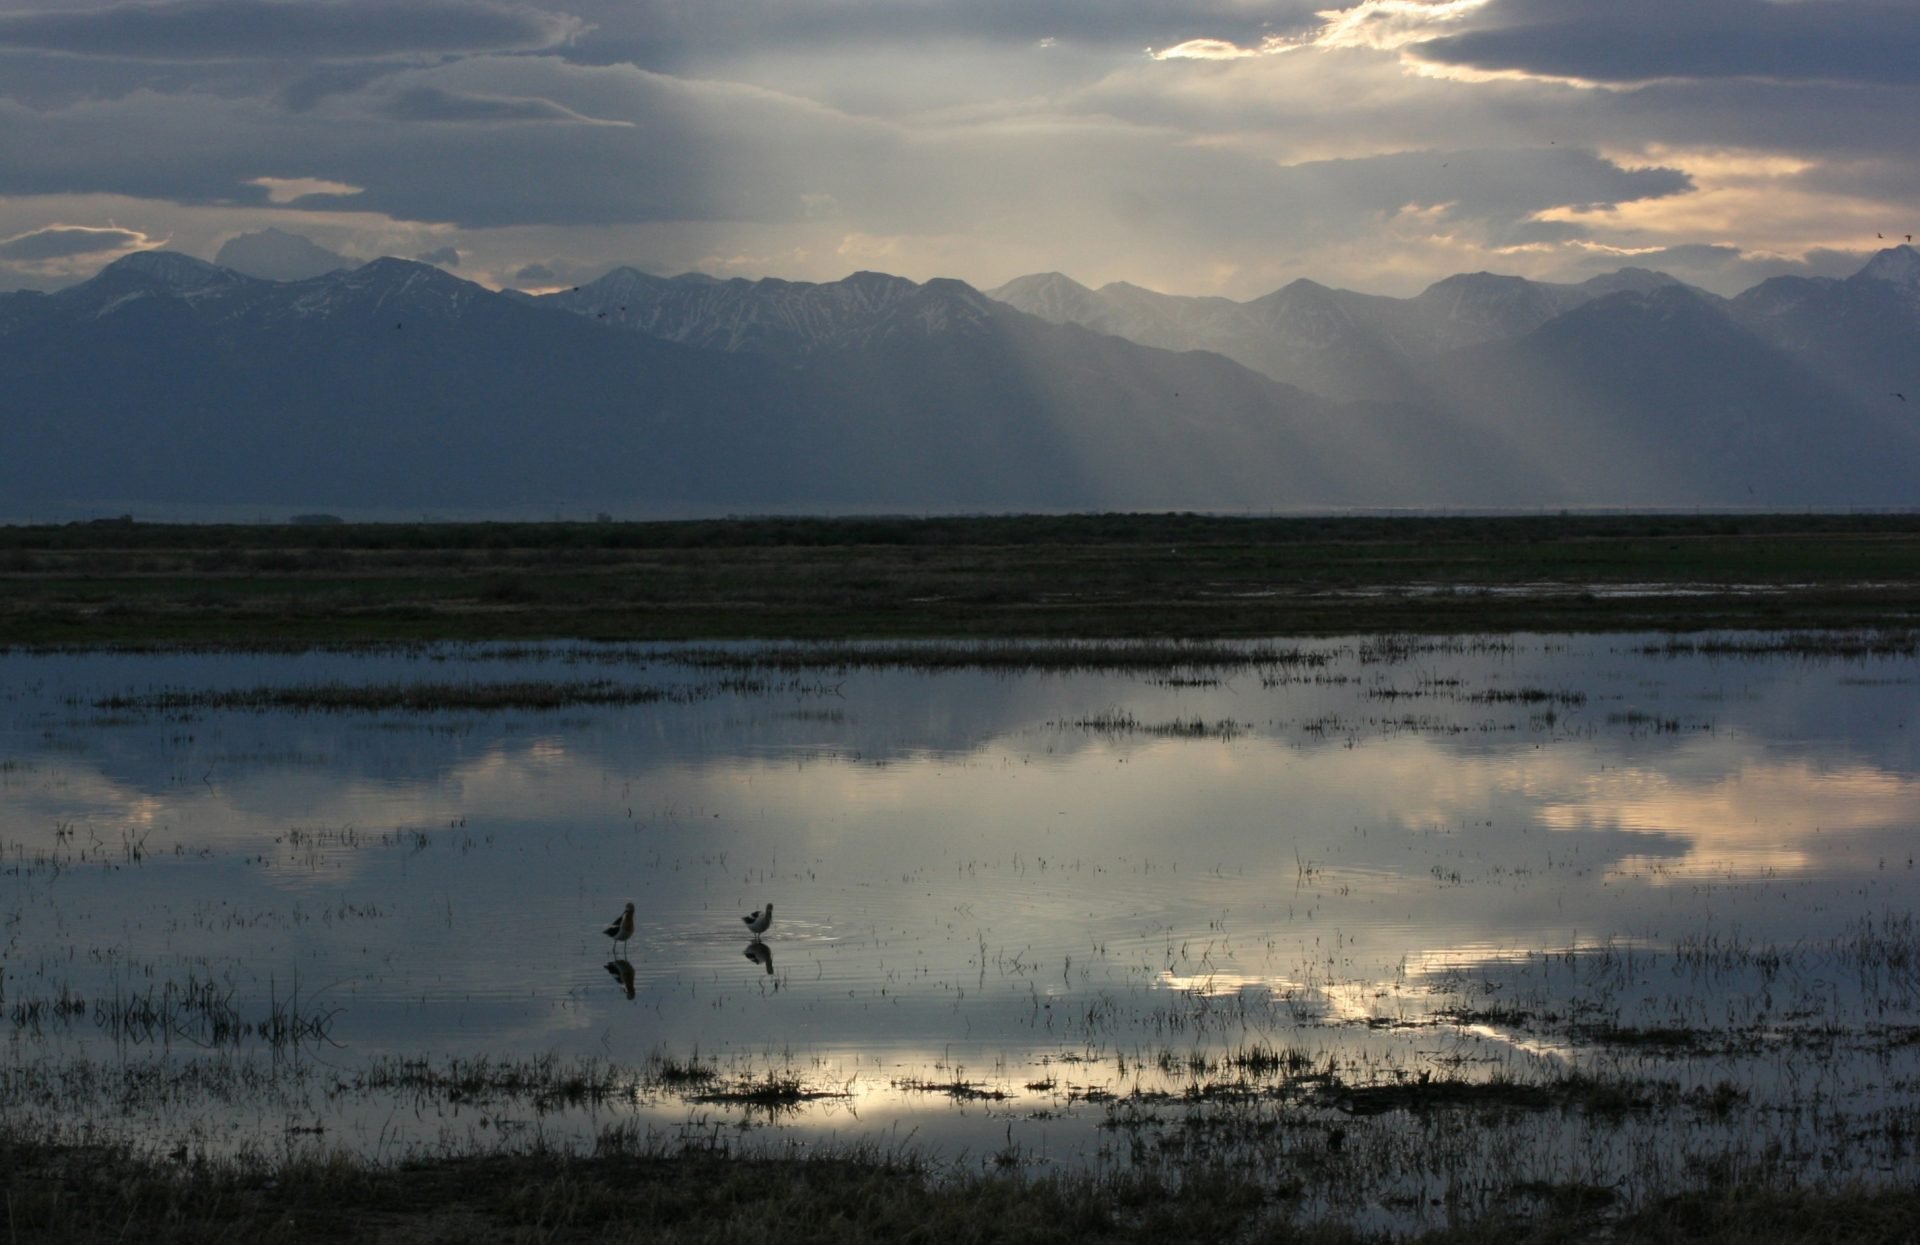 Avocets hunt in San Luis Valley wetland with a backdrop of mountains and filtered sunlight.